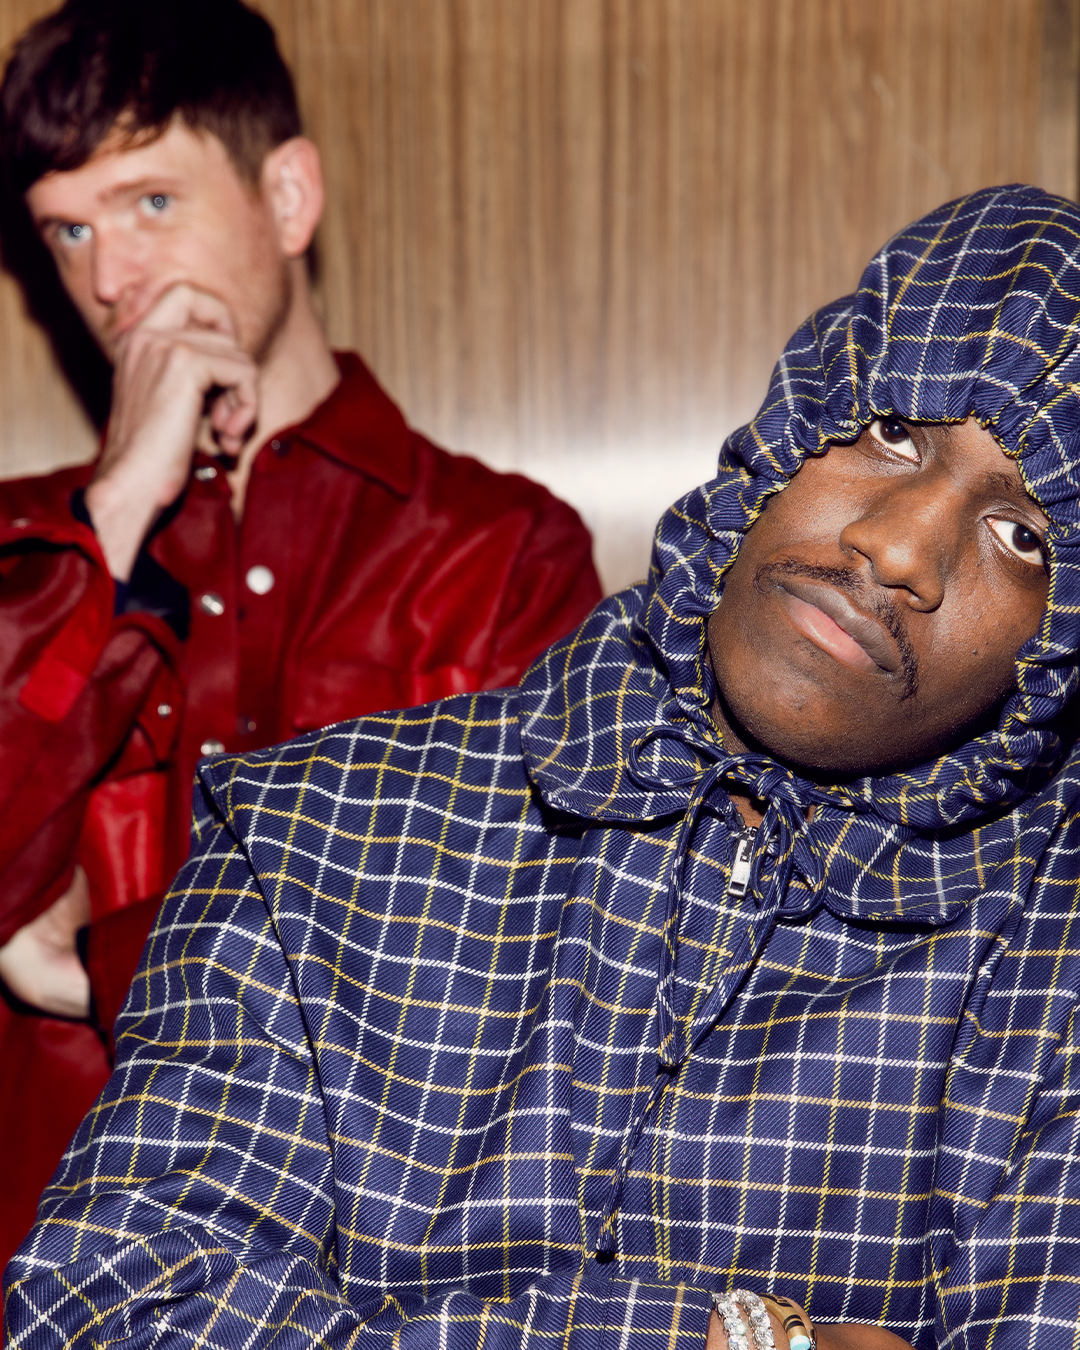 James Blake in a red shirt and Lil Yachty in a hooded checkered jacket pose for a photo